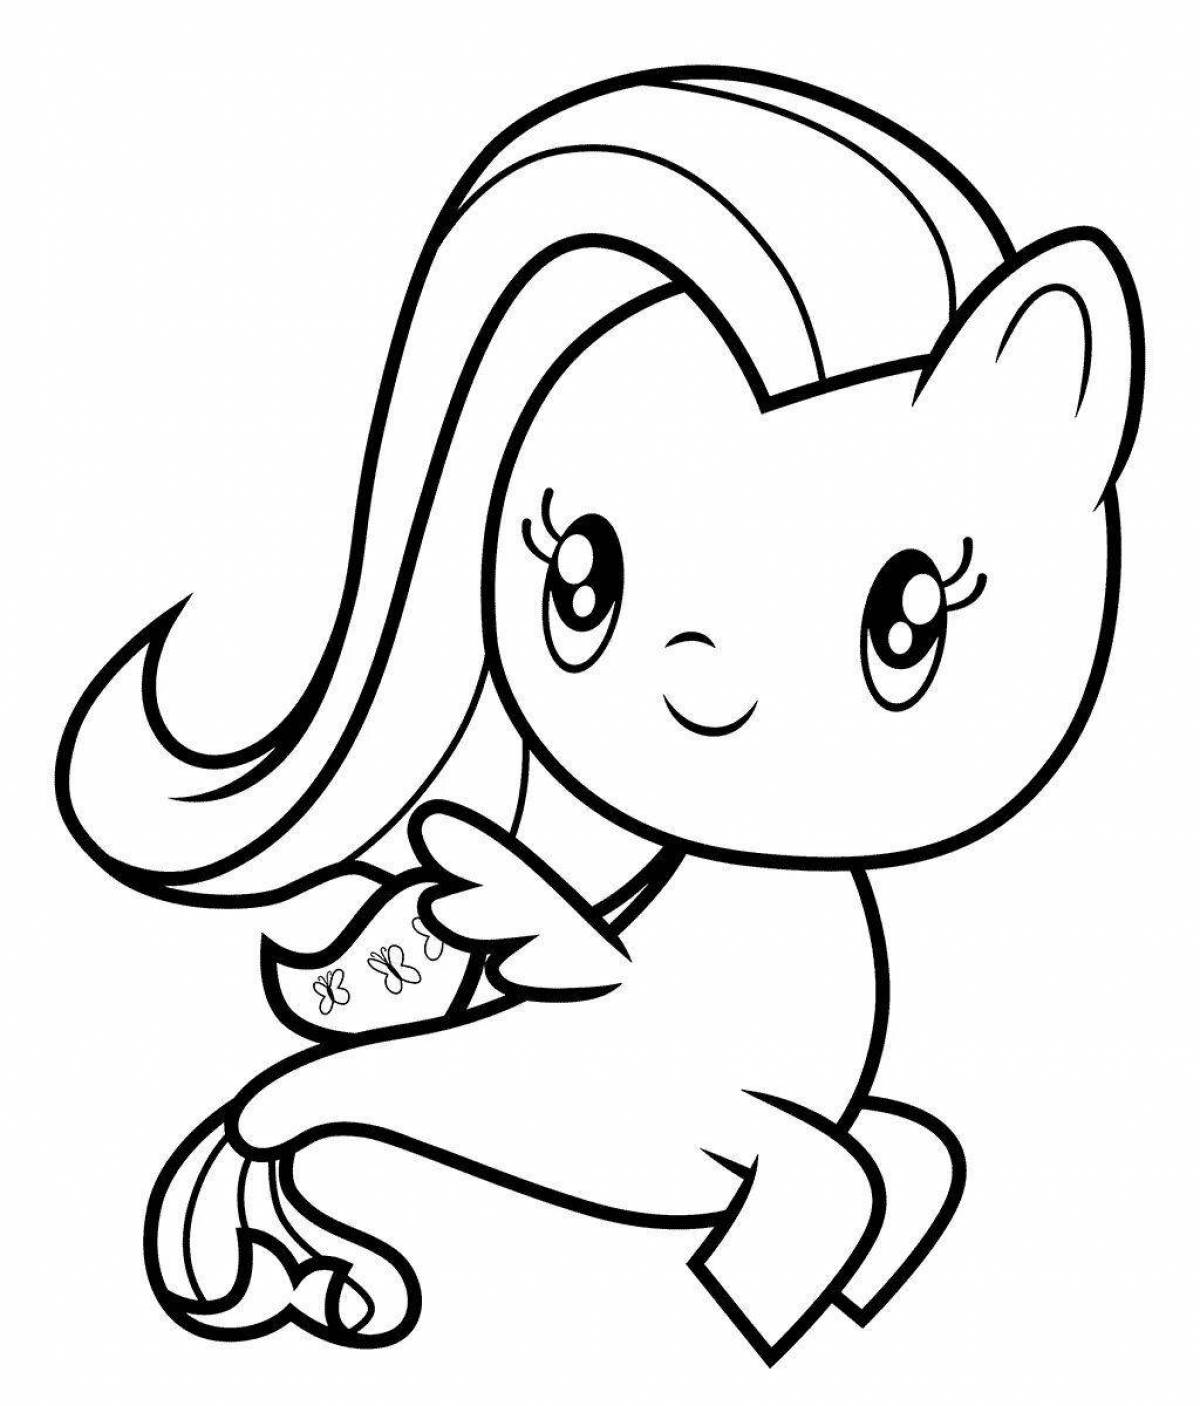 Dazzling coloring book for pony cutie girls